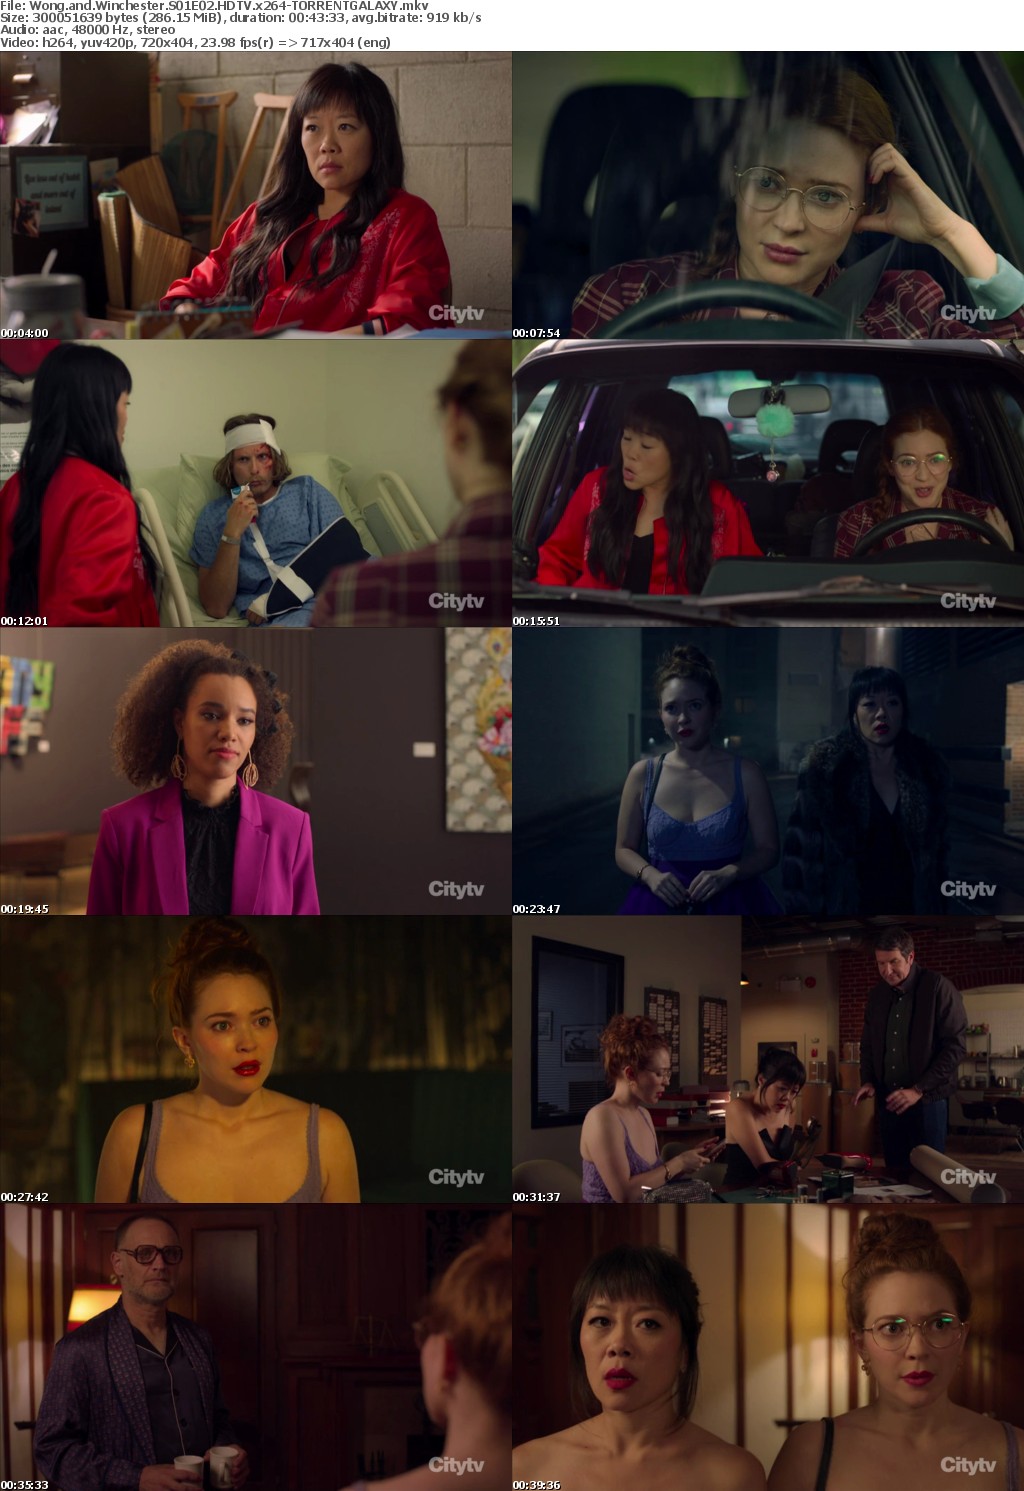 Wong and Winchester S01E02 HDTV x264-GALAXY